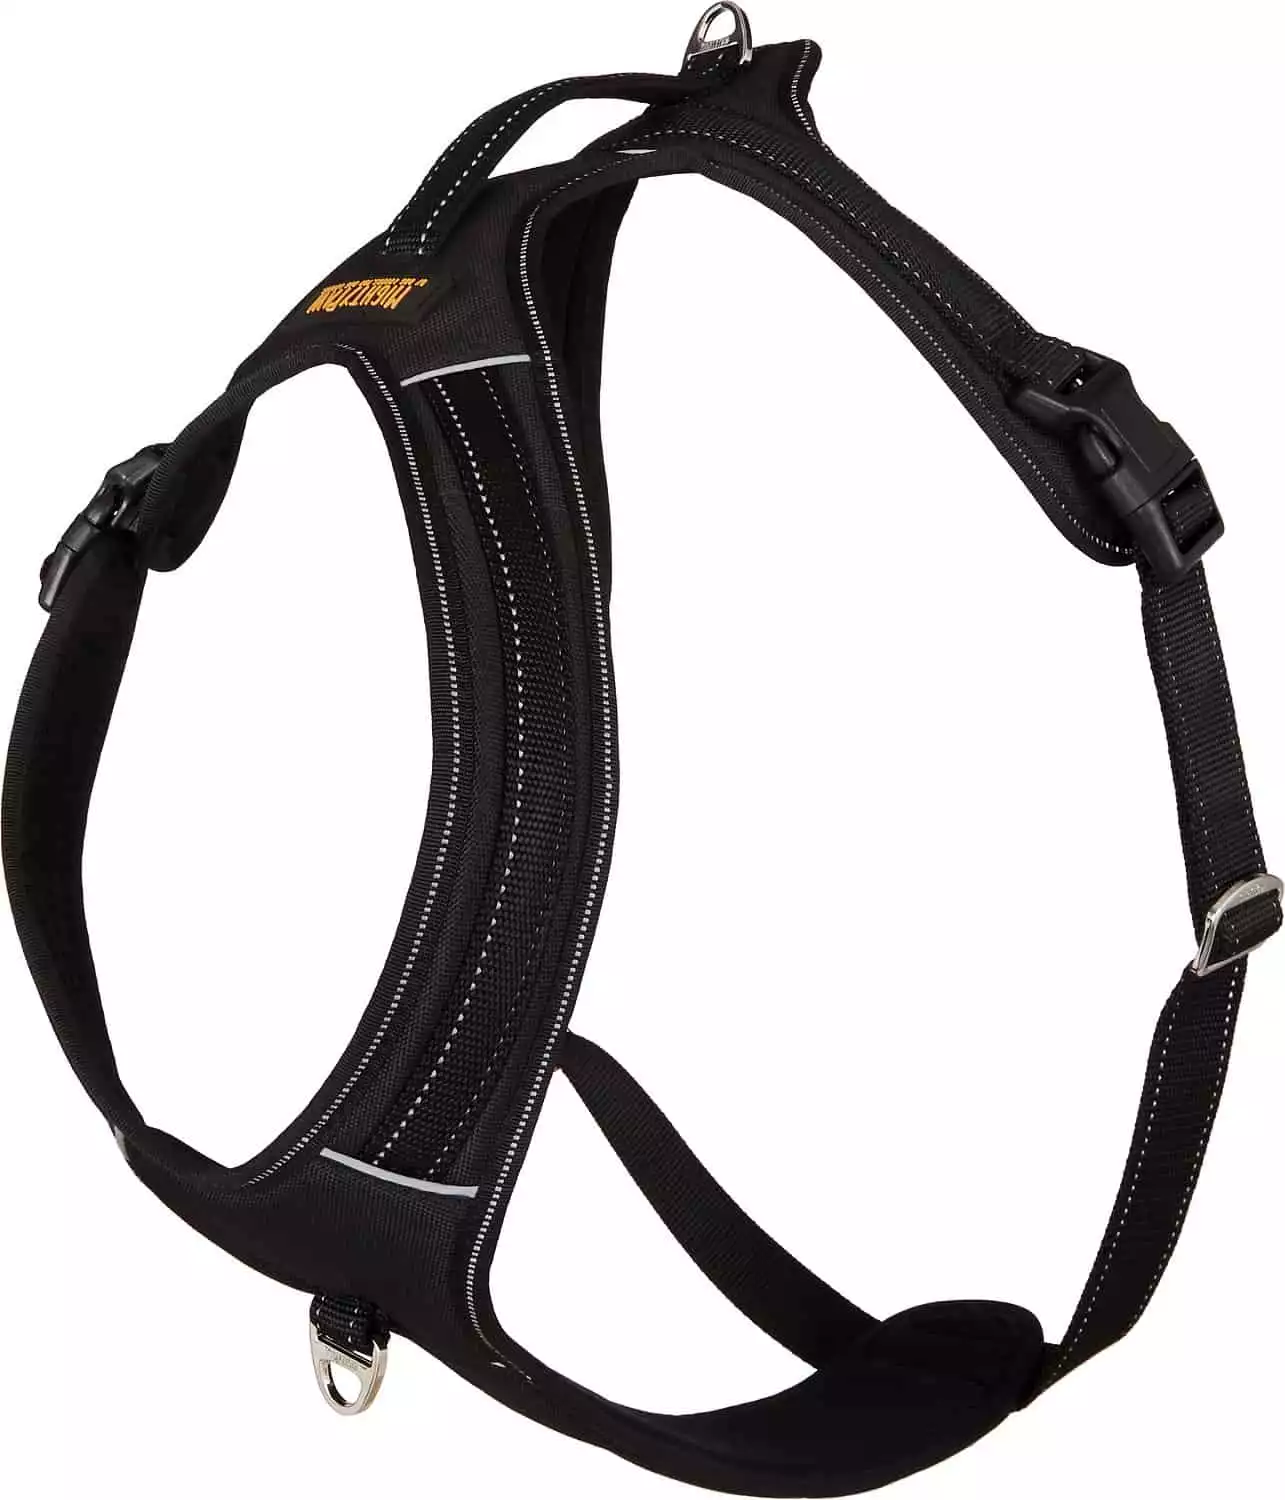 Mighty Paw Sports Harness